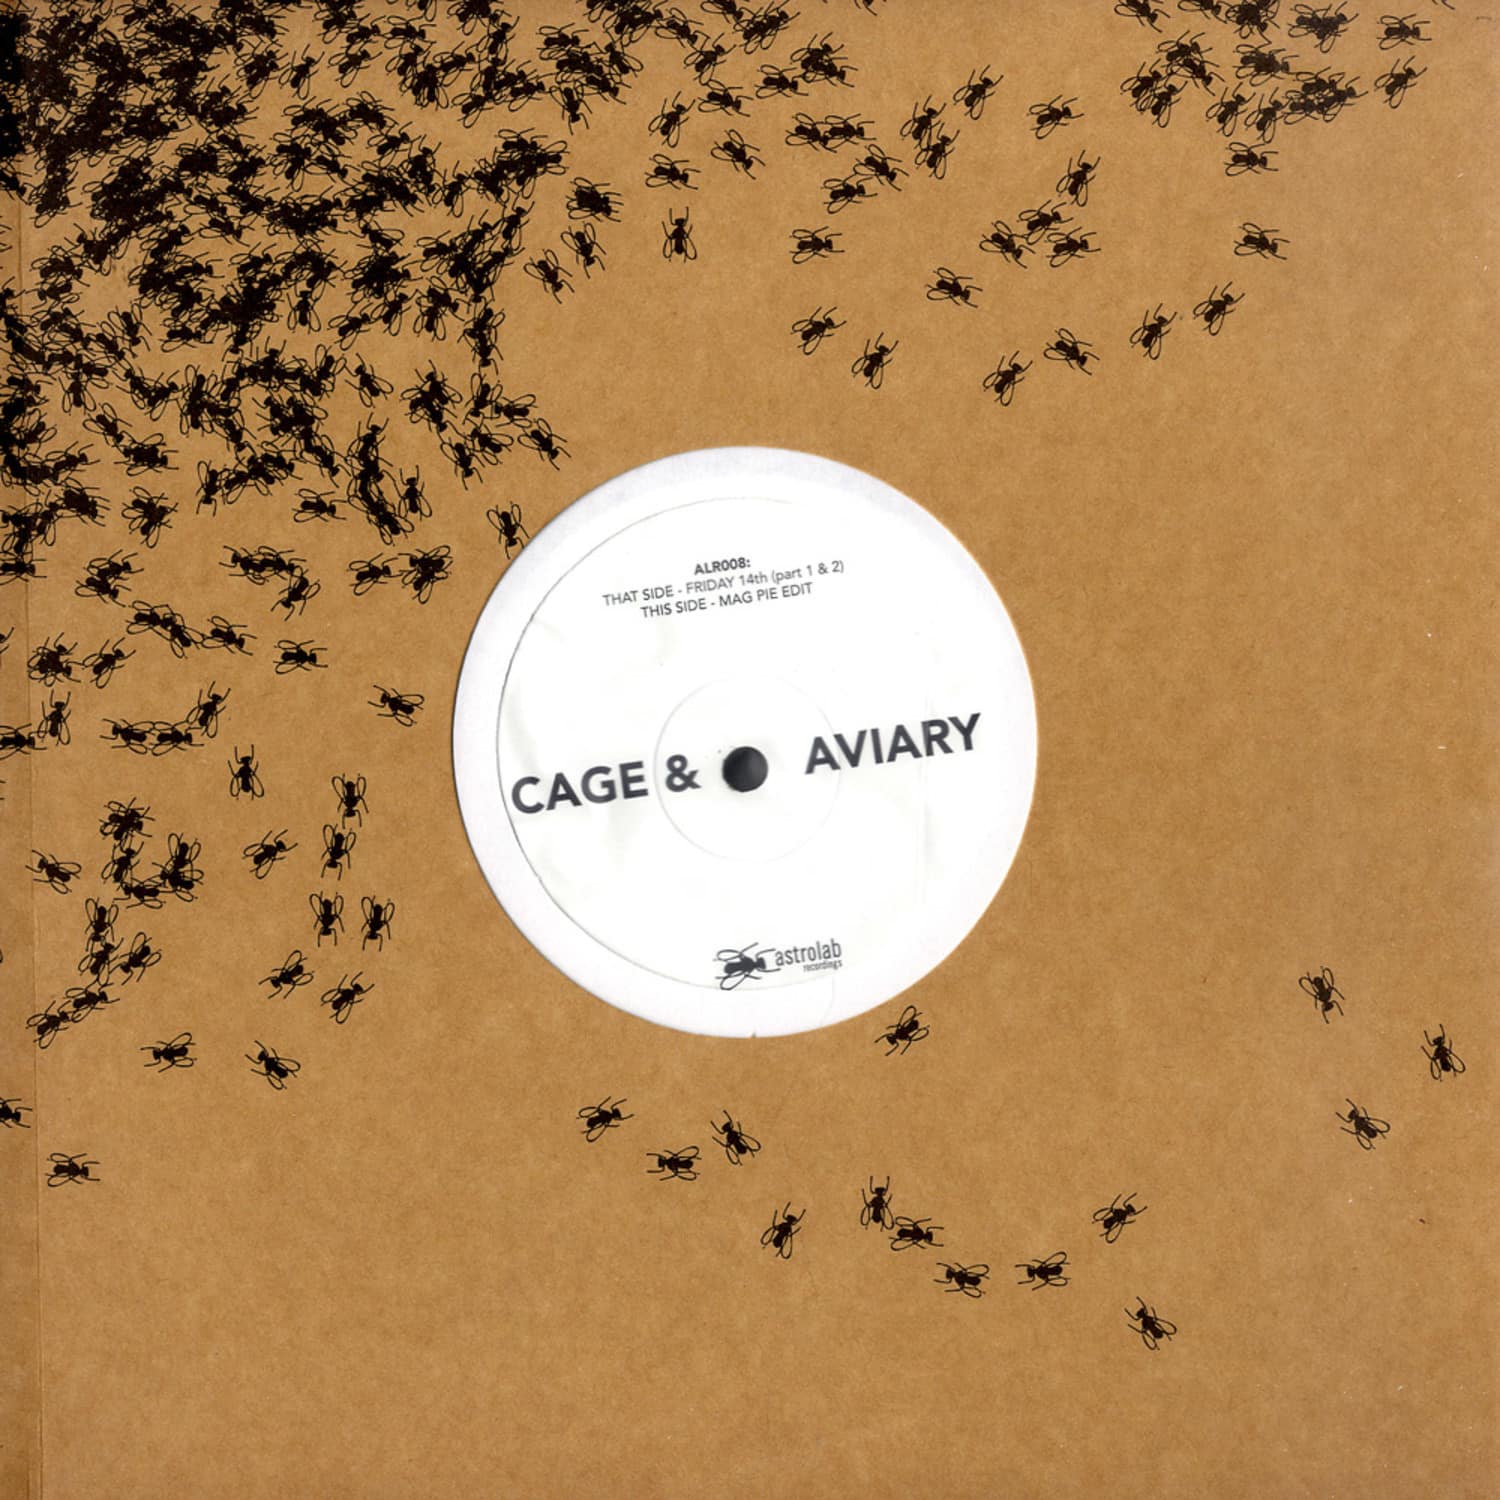 Cage & Aviary - EP 